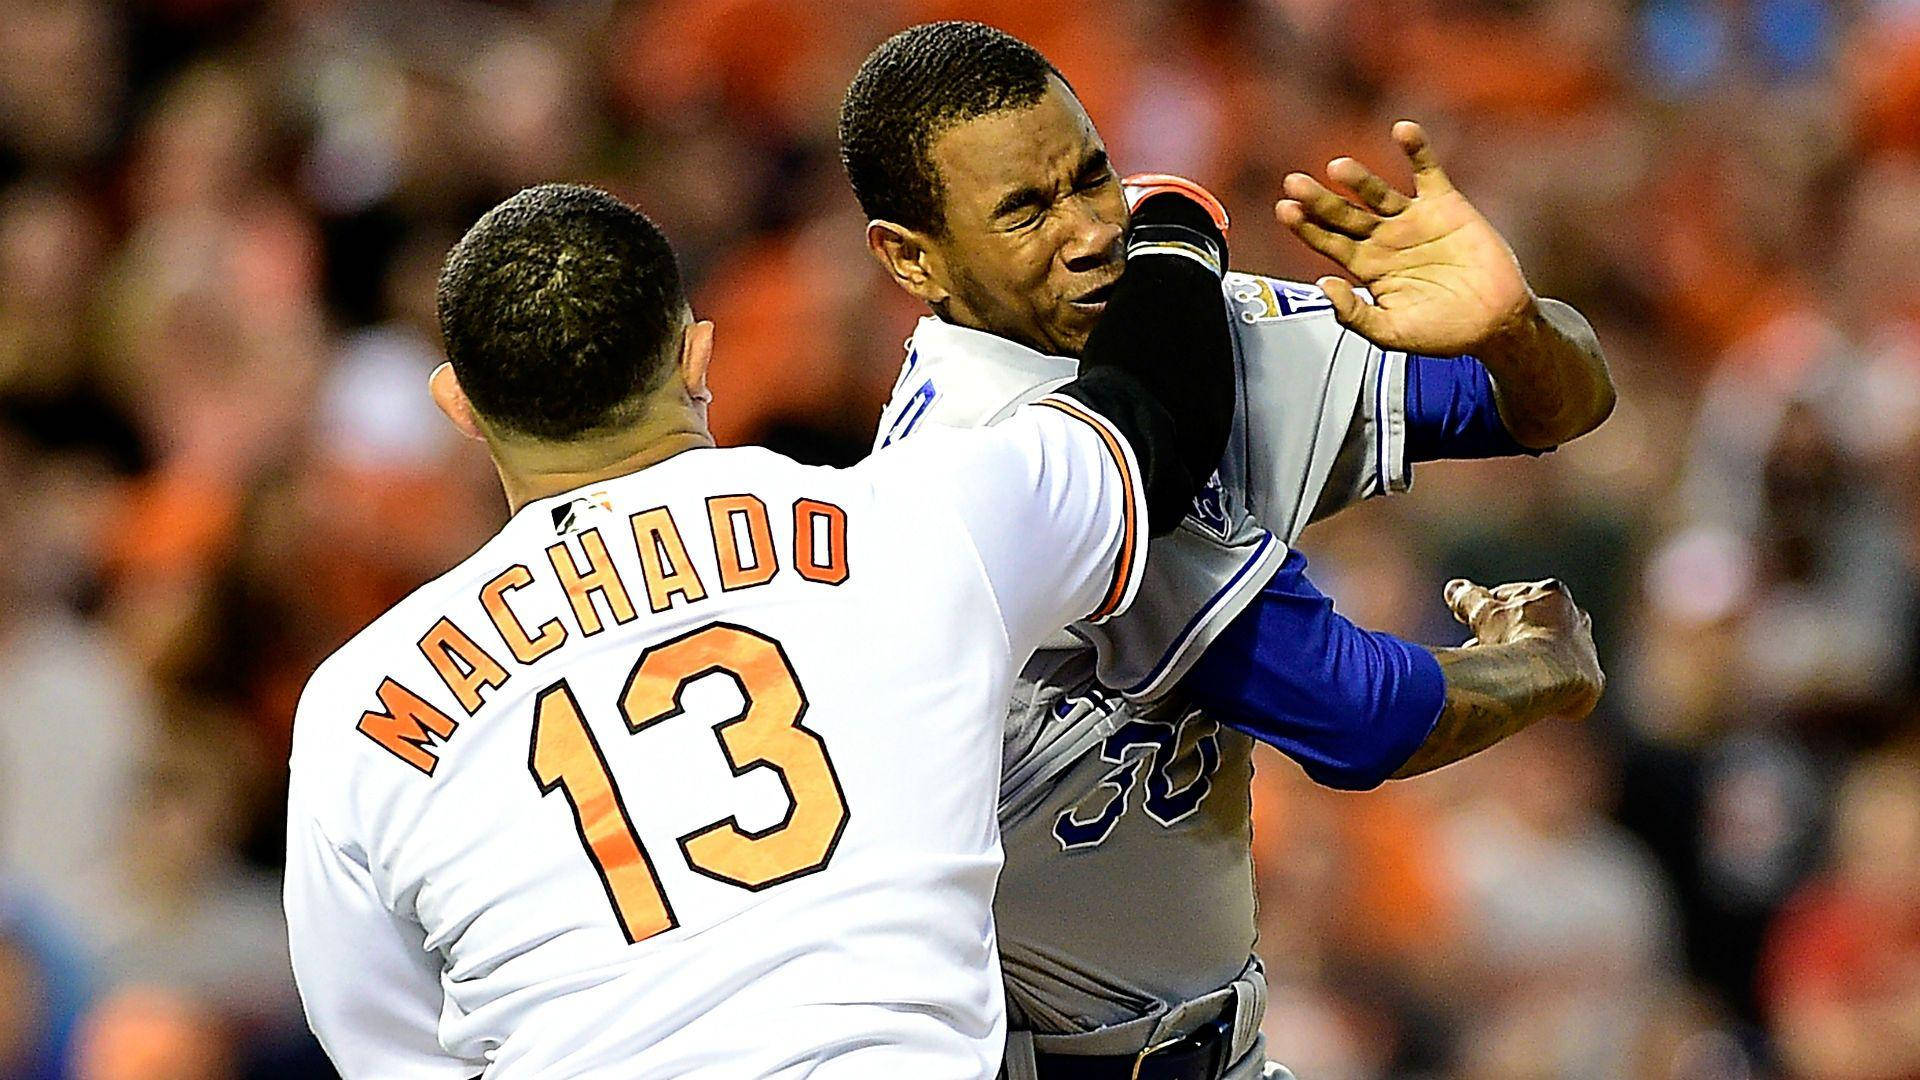 Download Manny Machado And Opponent Wallpaper